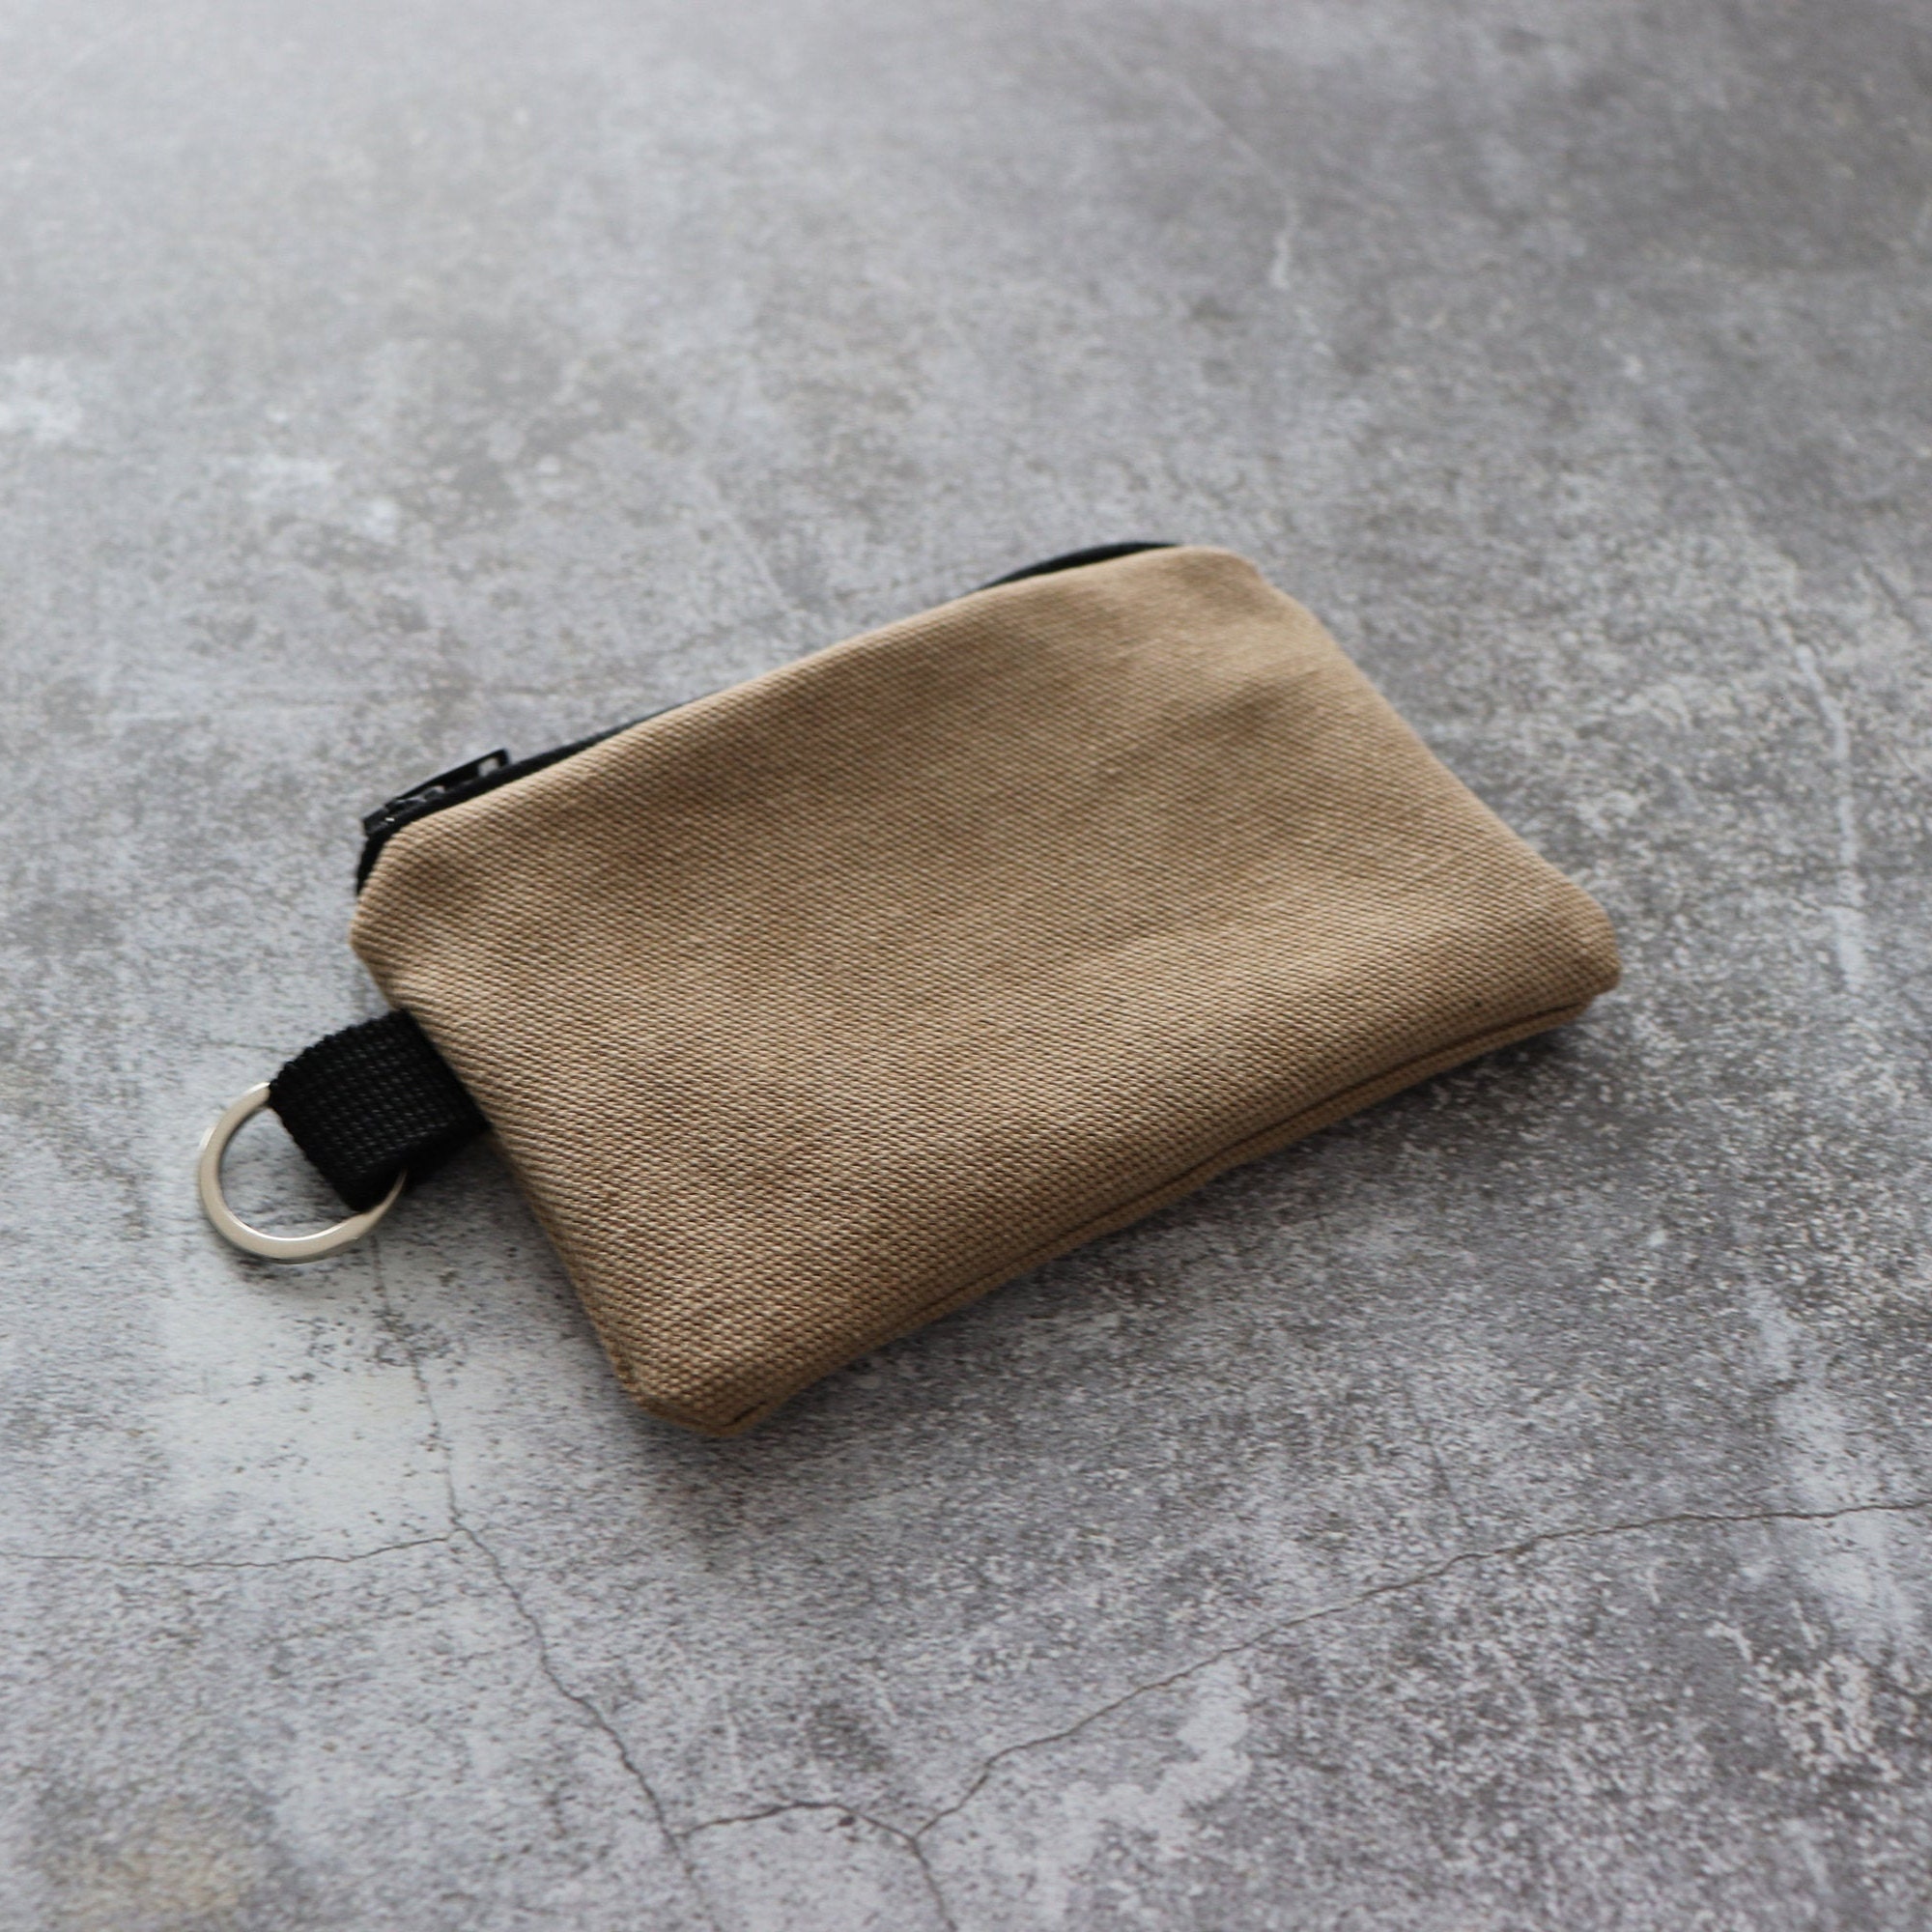 Set of 2 Holder Keychain Wallets with Zipper for Men and Women. Small Canvas Coin Pouch with Key ring.Gift for Dad, Boyfriend, Husband.